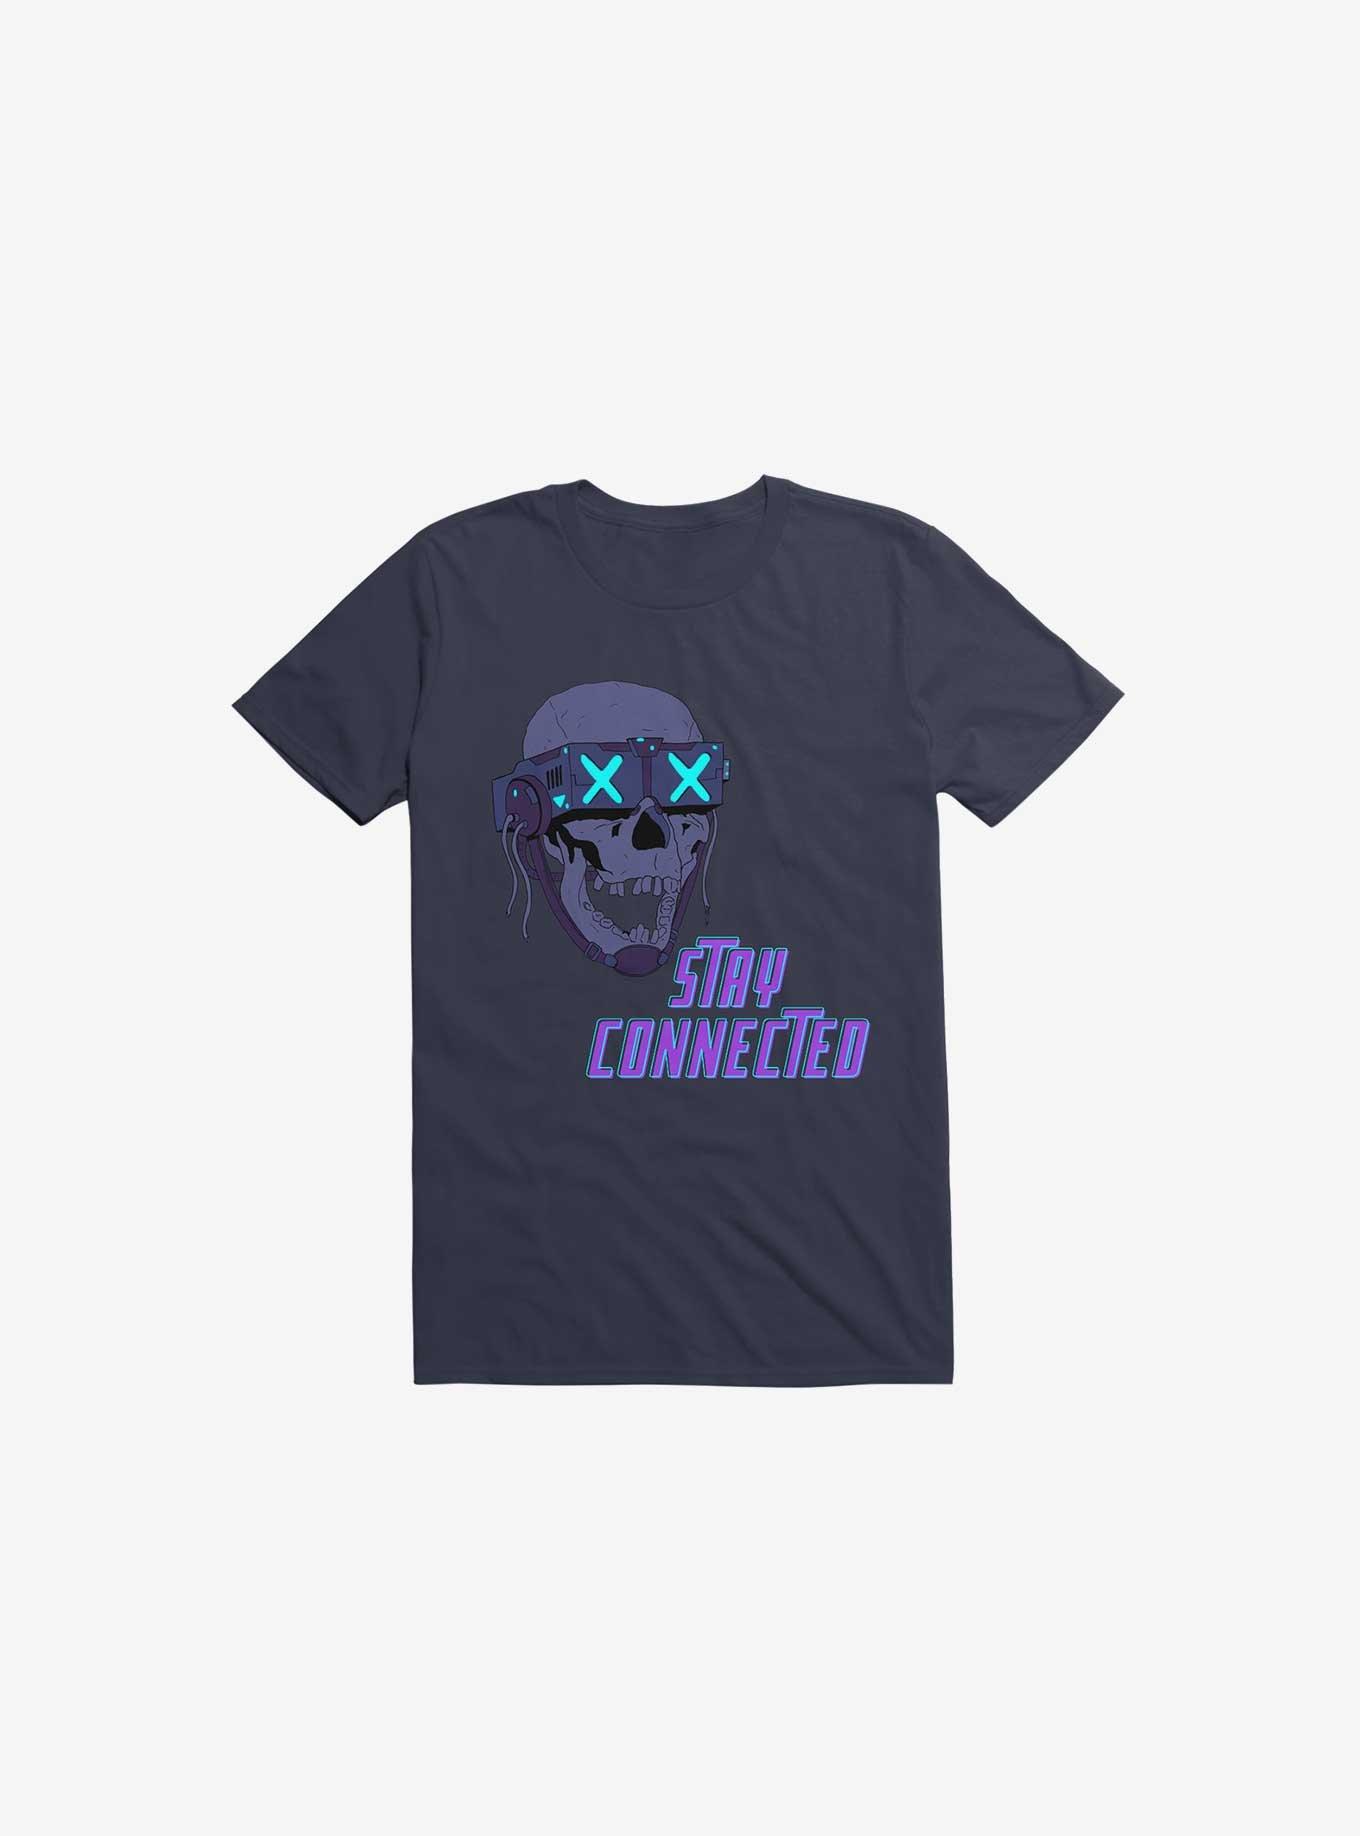 Stay_Connected 2.0 Navy Blue T-Shirt, NAVY, hi-res